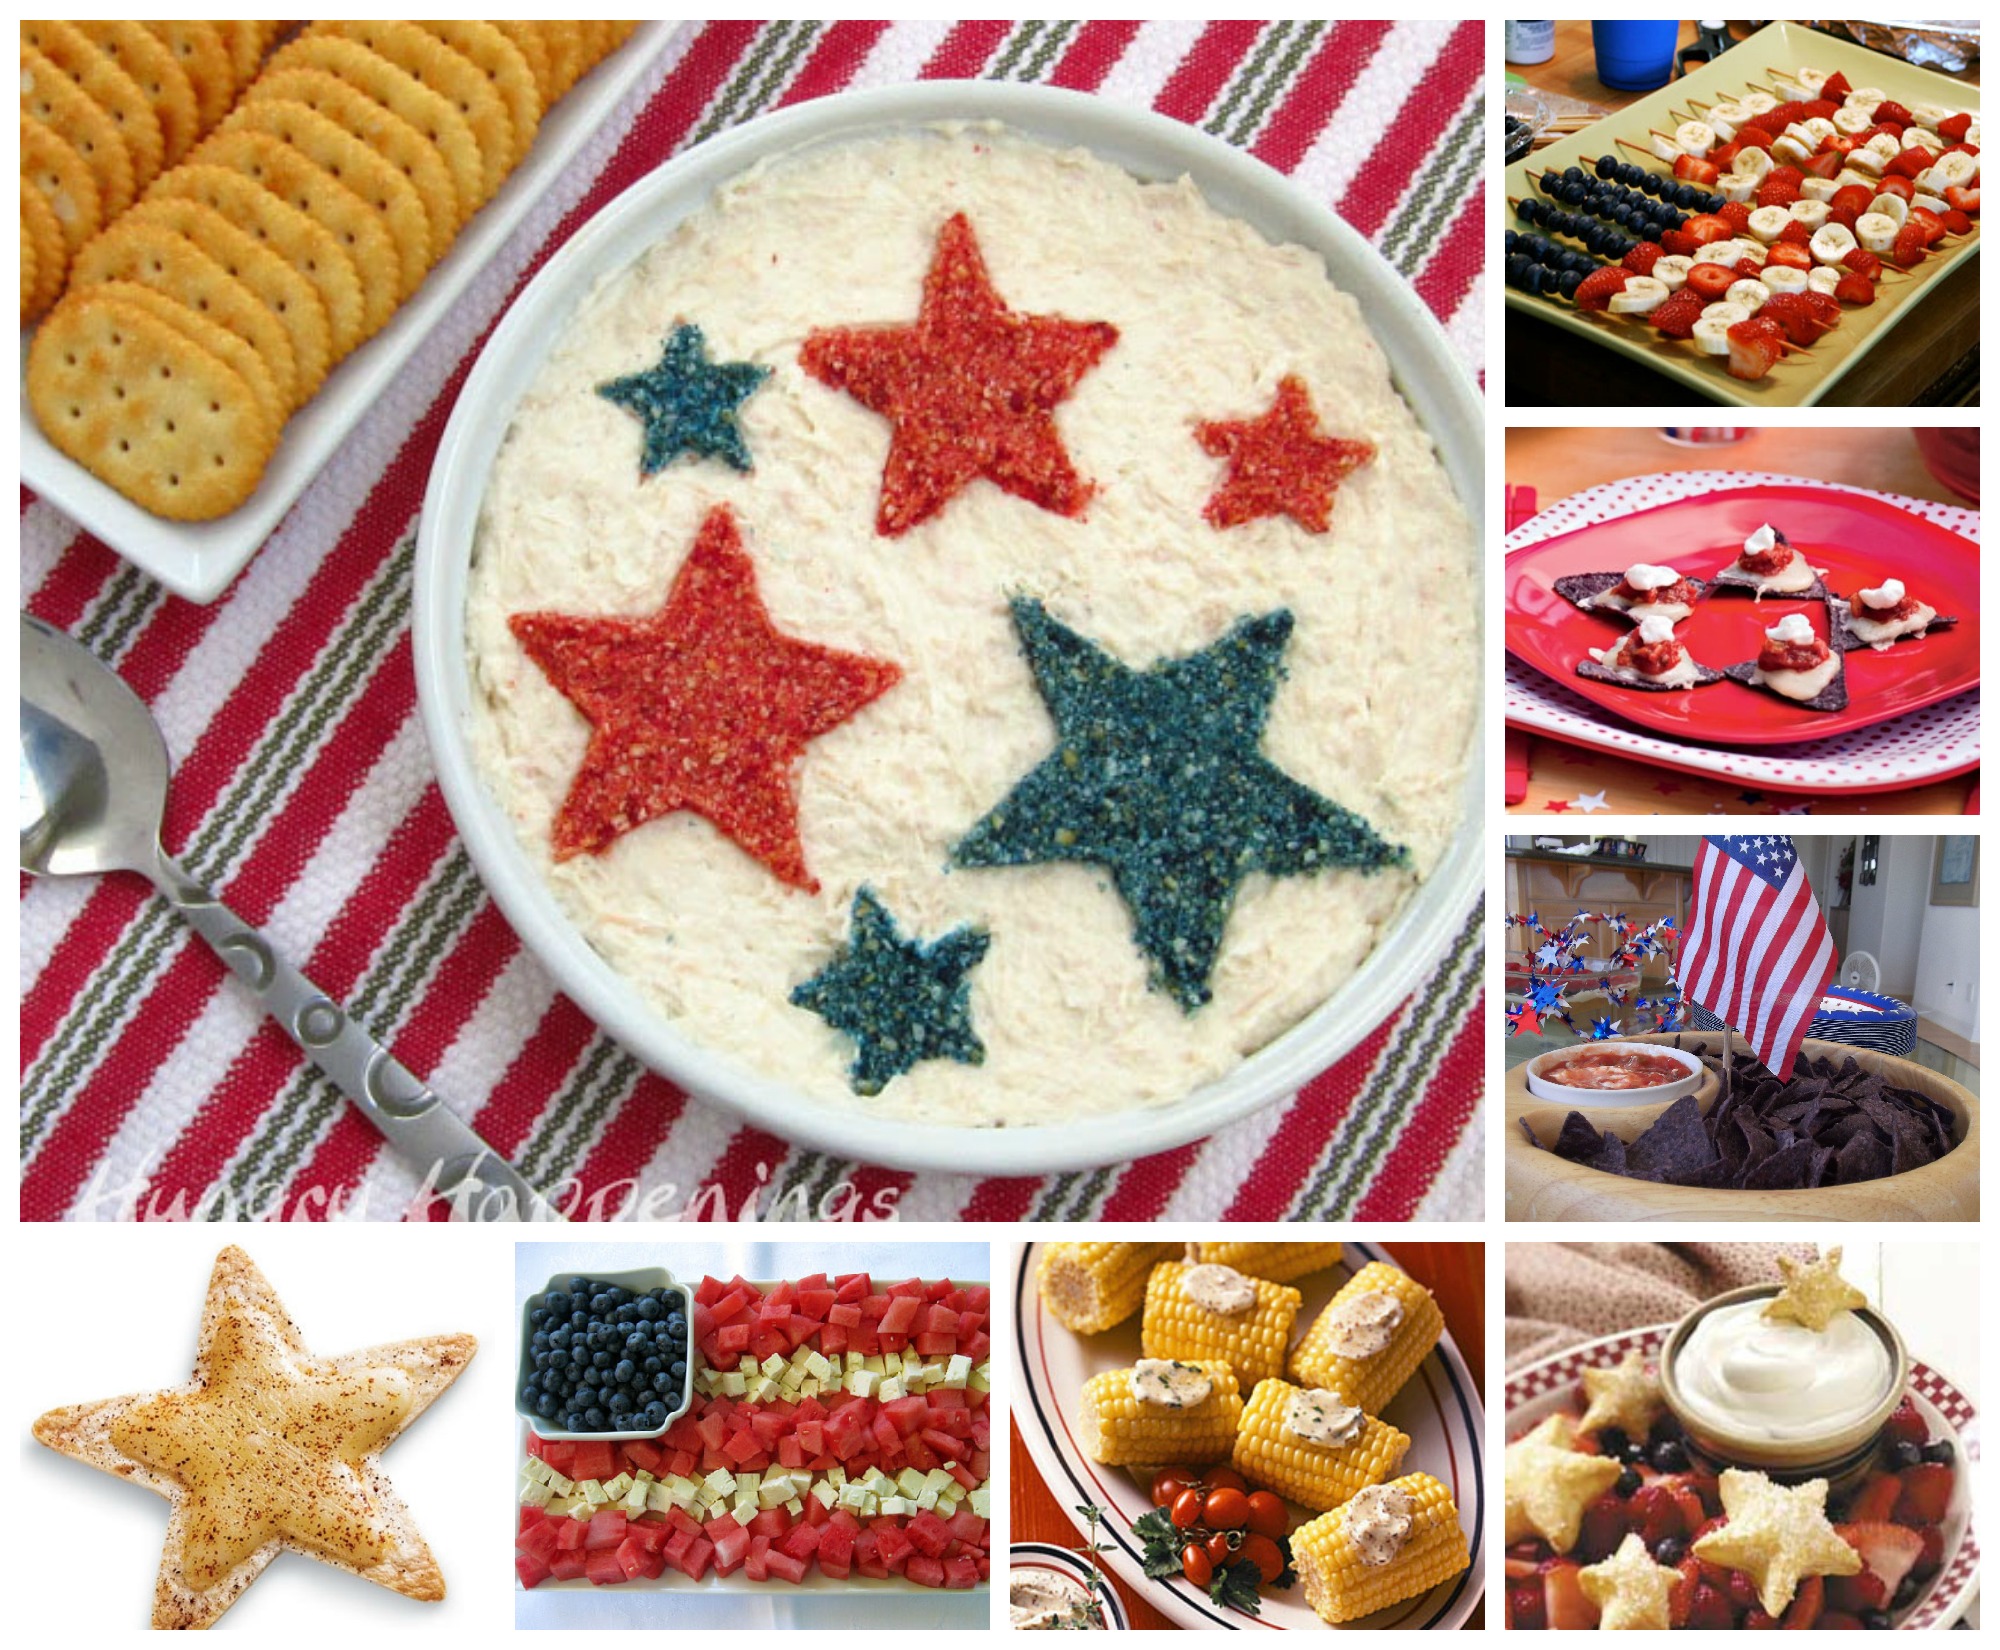 July 4th Appetizer Ideas and Recipes